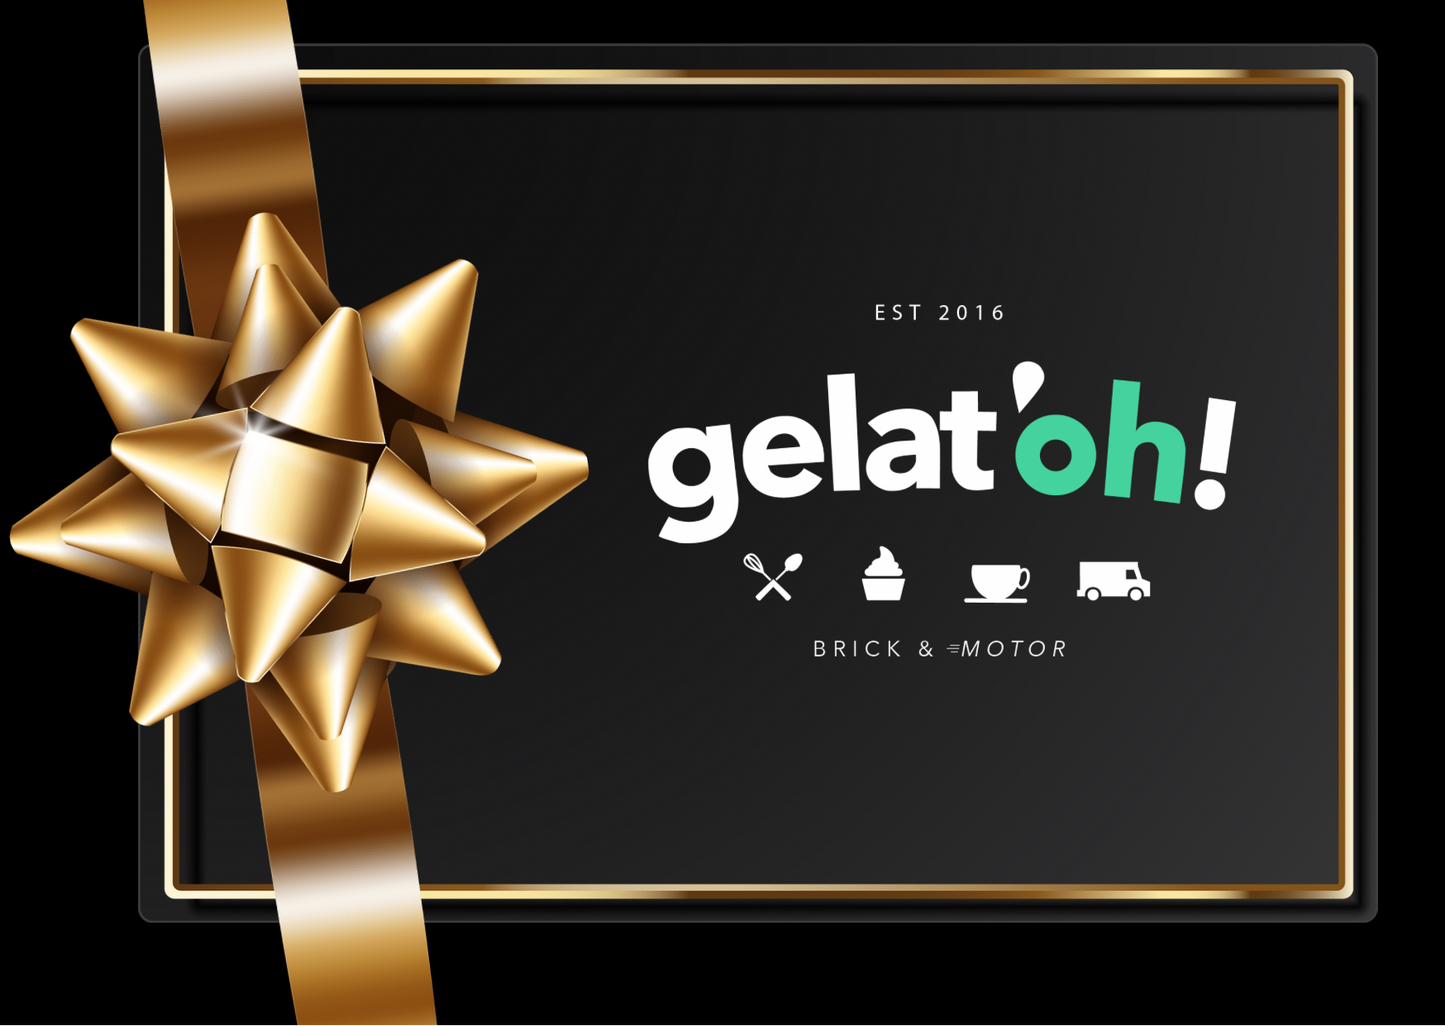 THE GELAT’OH GIFT CARD